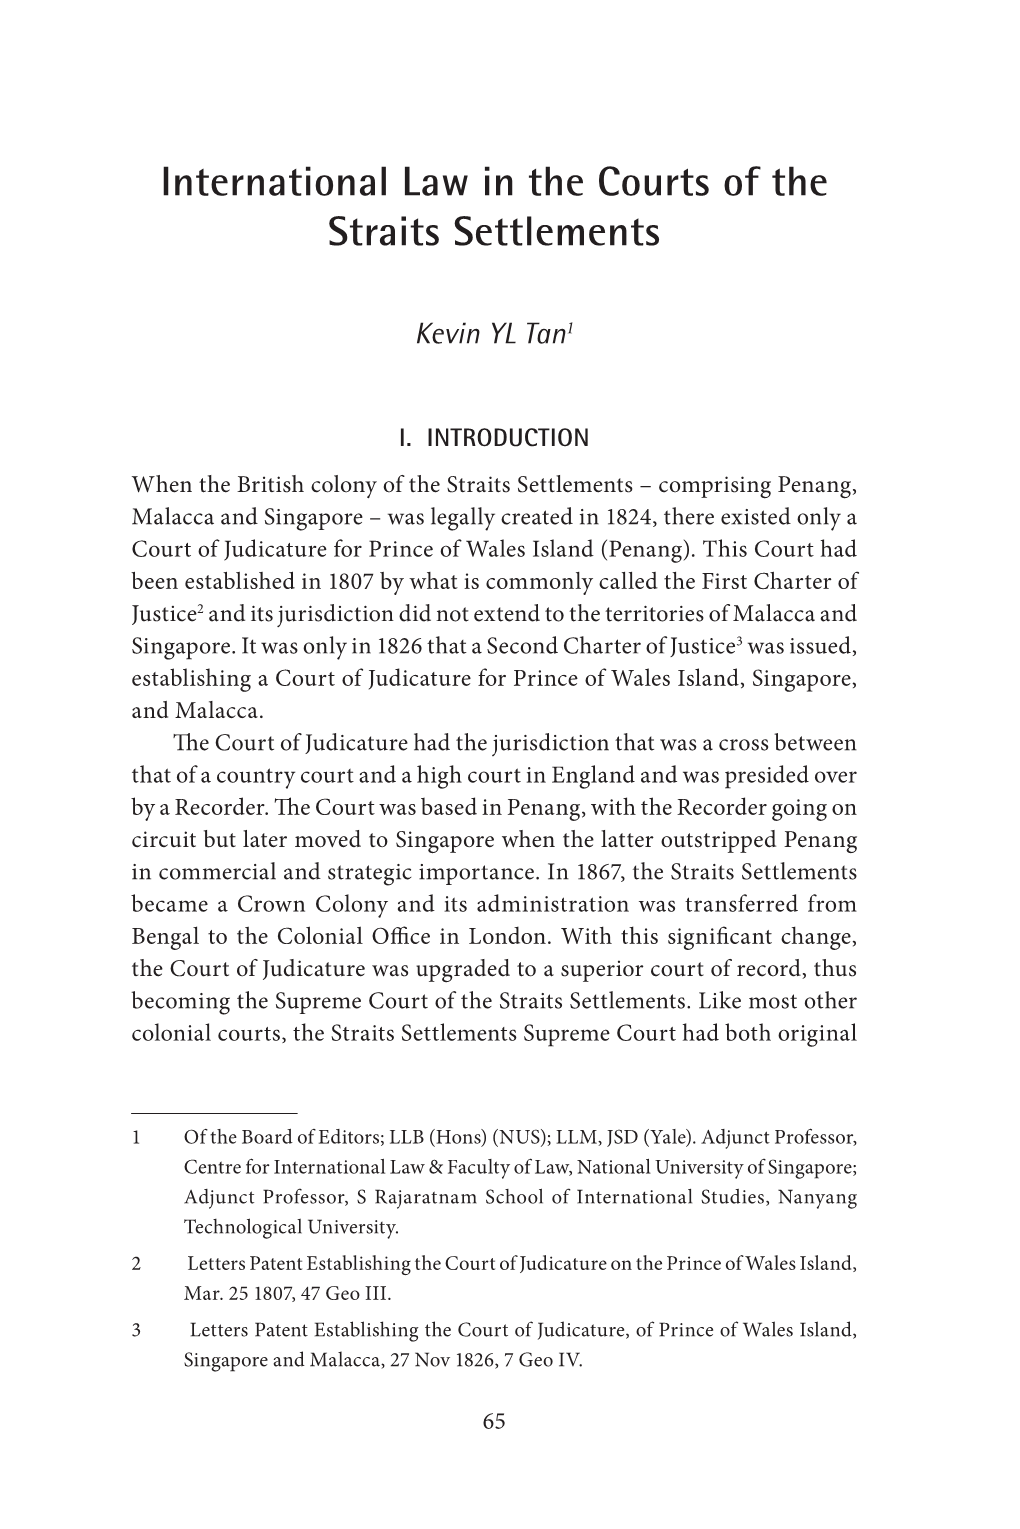 International Law in the Courts of the Straits Settlements